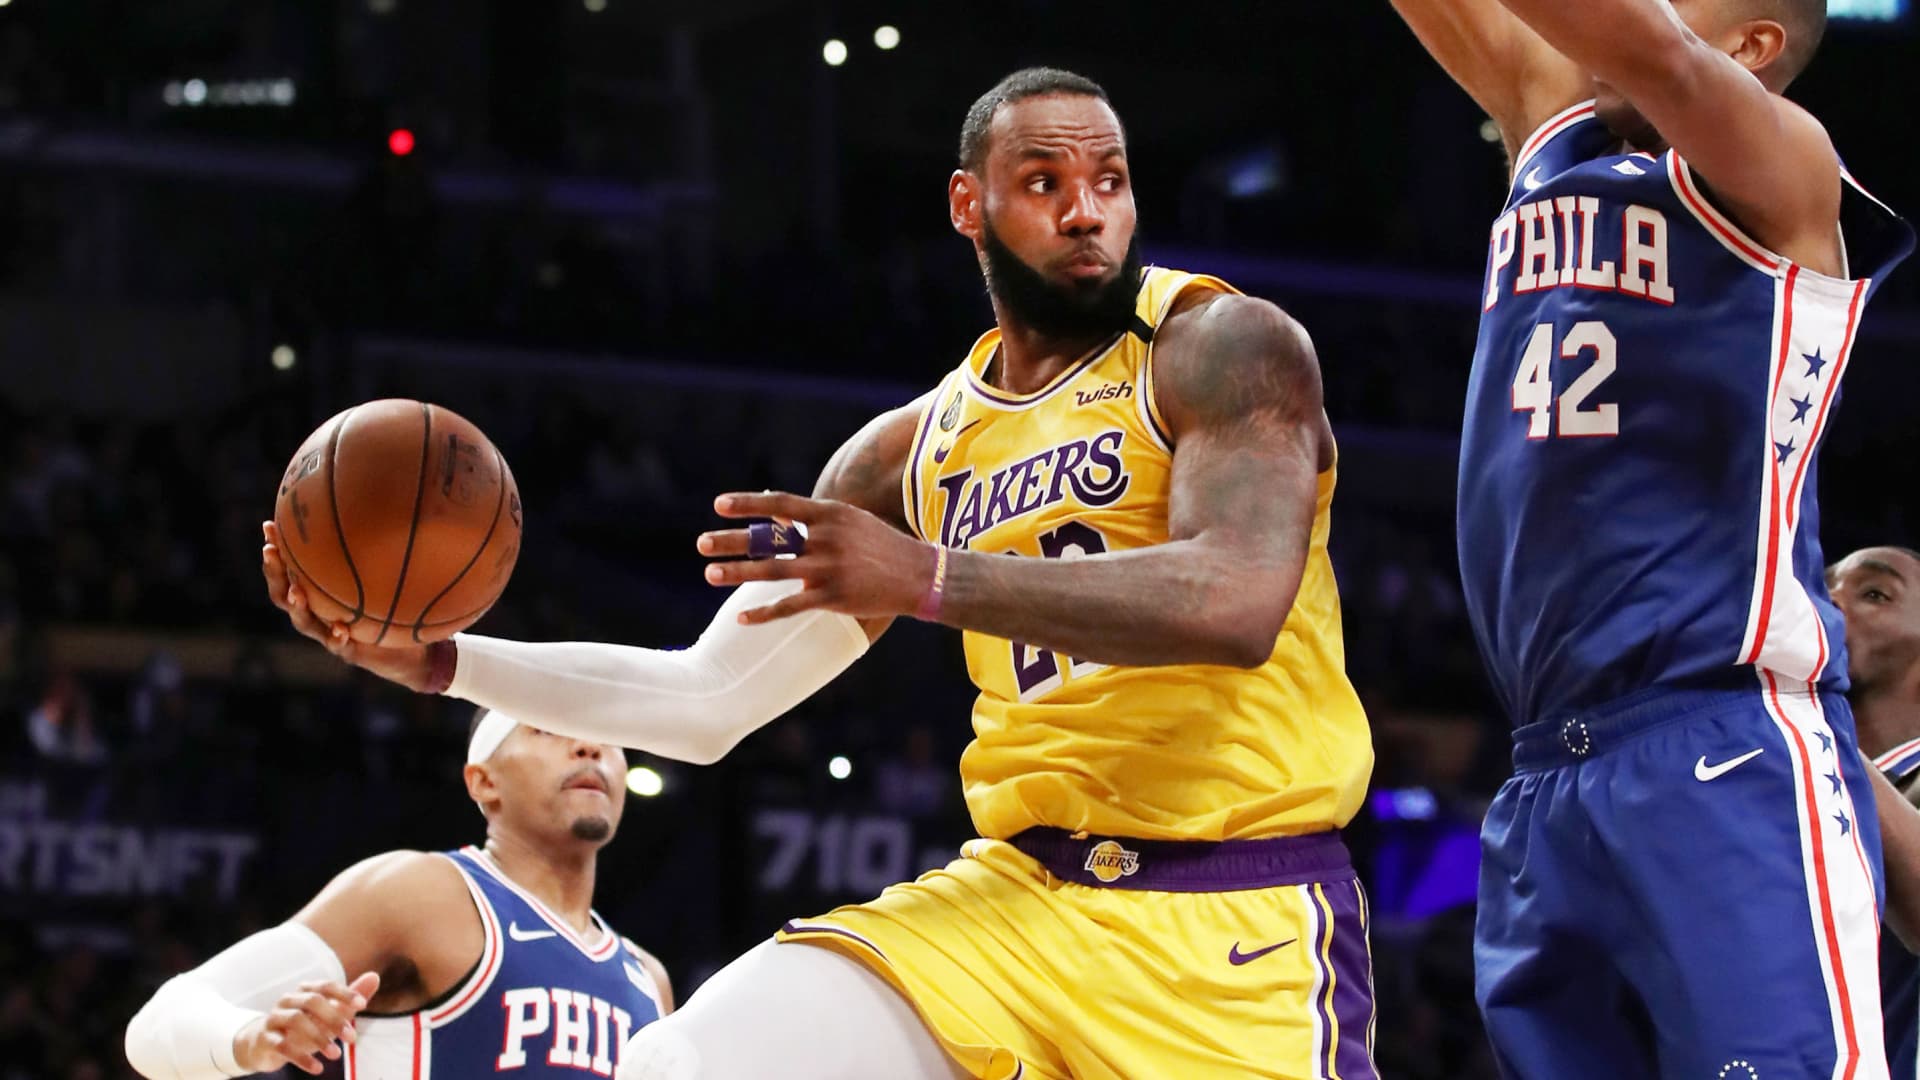 LeBron James of the Los Angeles Lakers passes the ball under the hoop against Al Horford #42 of the Philadelphia 76ers during the second half at Staples Center on March 03, 2020 in Los Angeles, California.